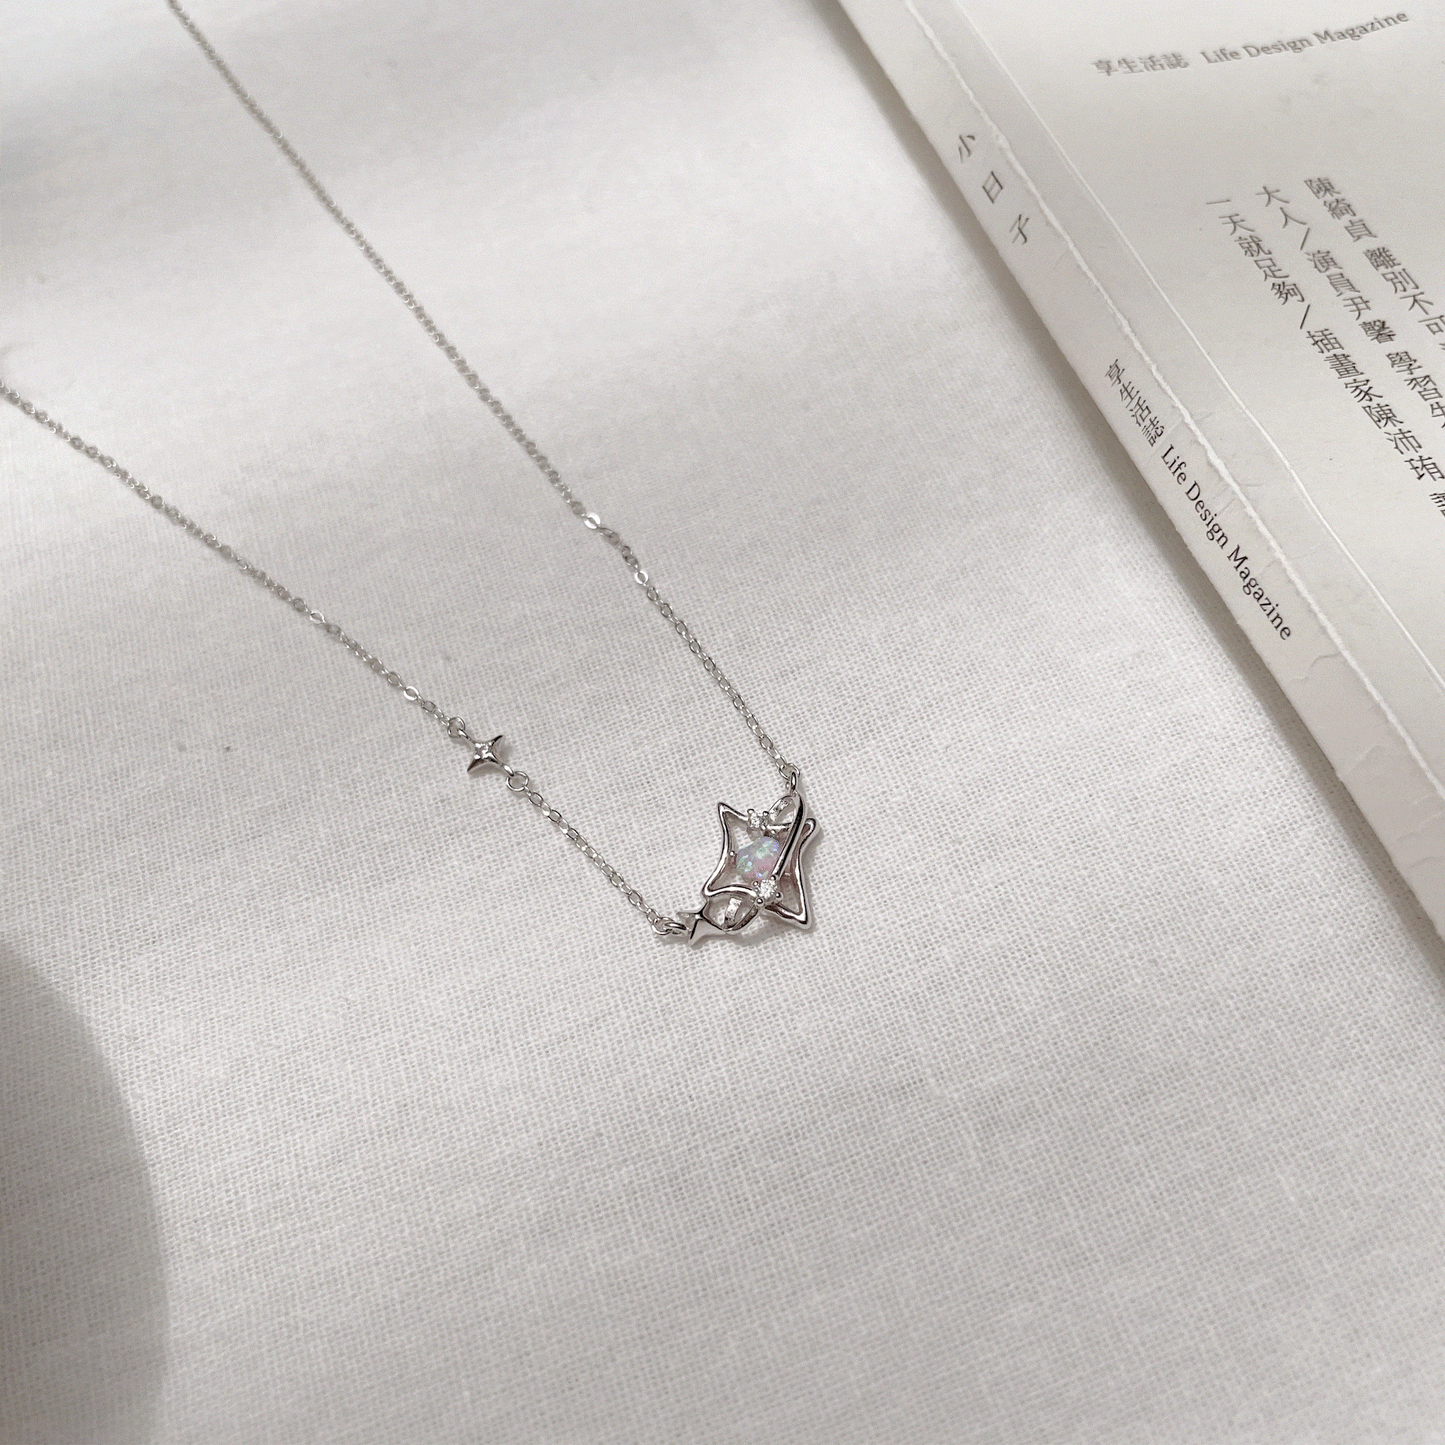 To-get-her- Starlight Necklace